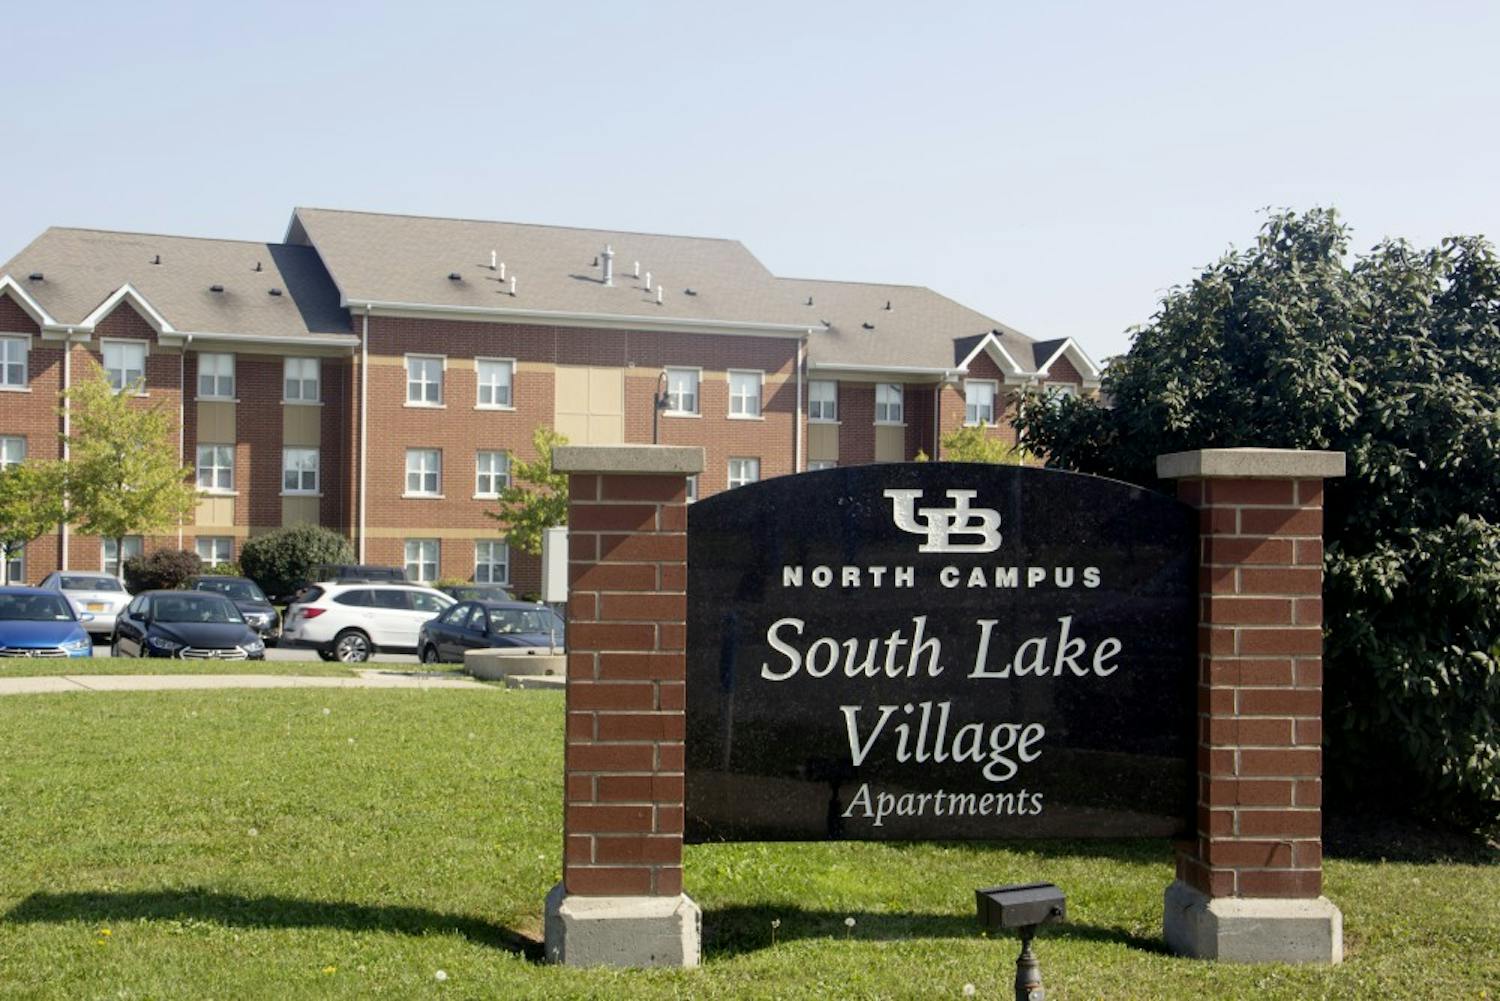 Many South Lake Village residents have consistently seen spiders in their apartments. The residents put work orders in to address the problem, but have been told conflicting information from maintenance and Campus Living regarding a permanent fix.